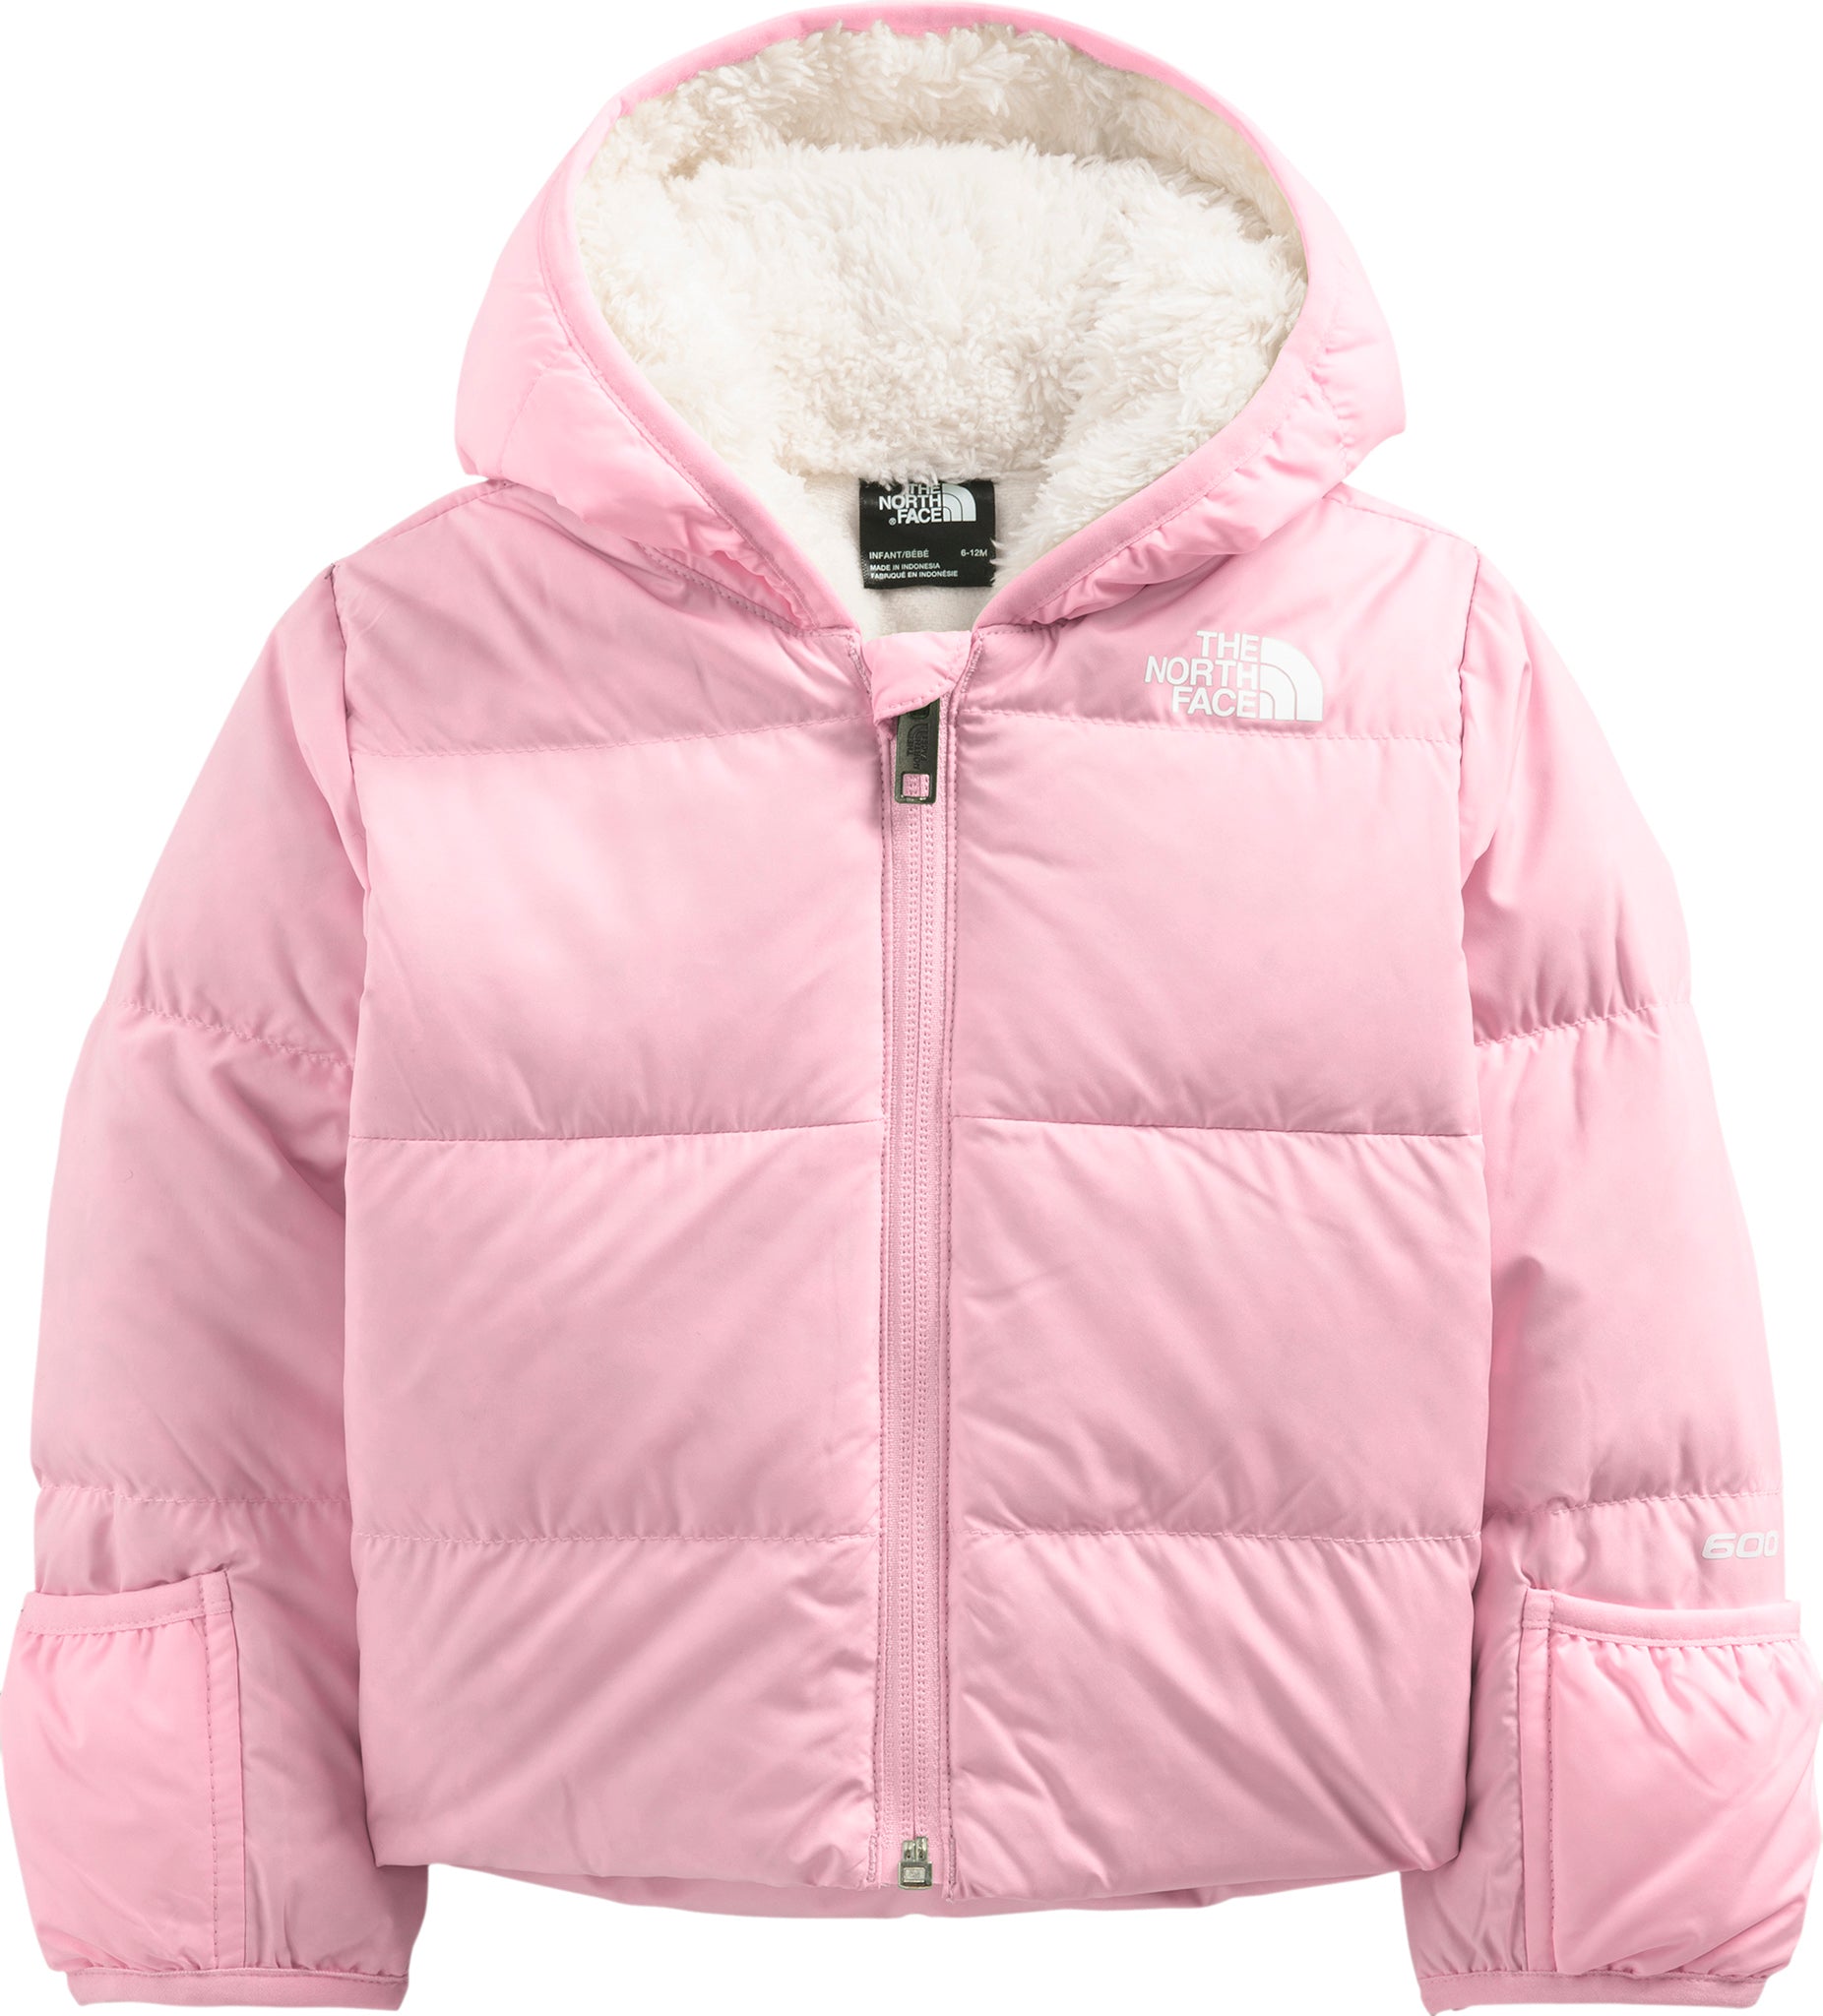 The North Face Little/Big Girls Suave Oso Mitt